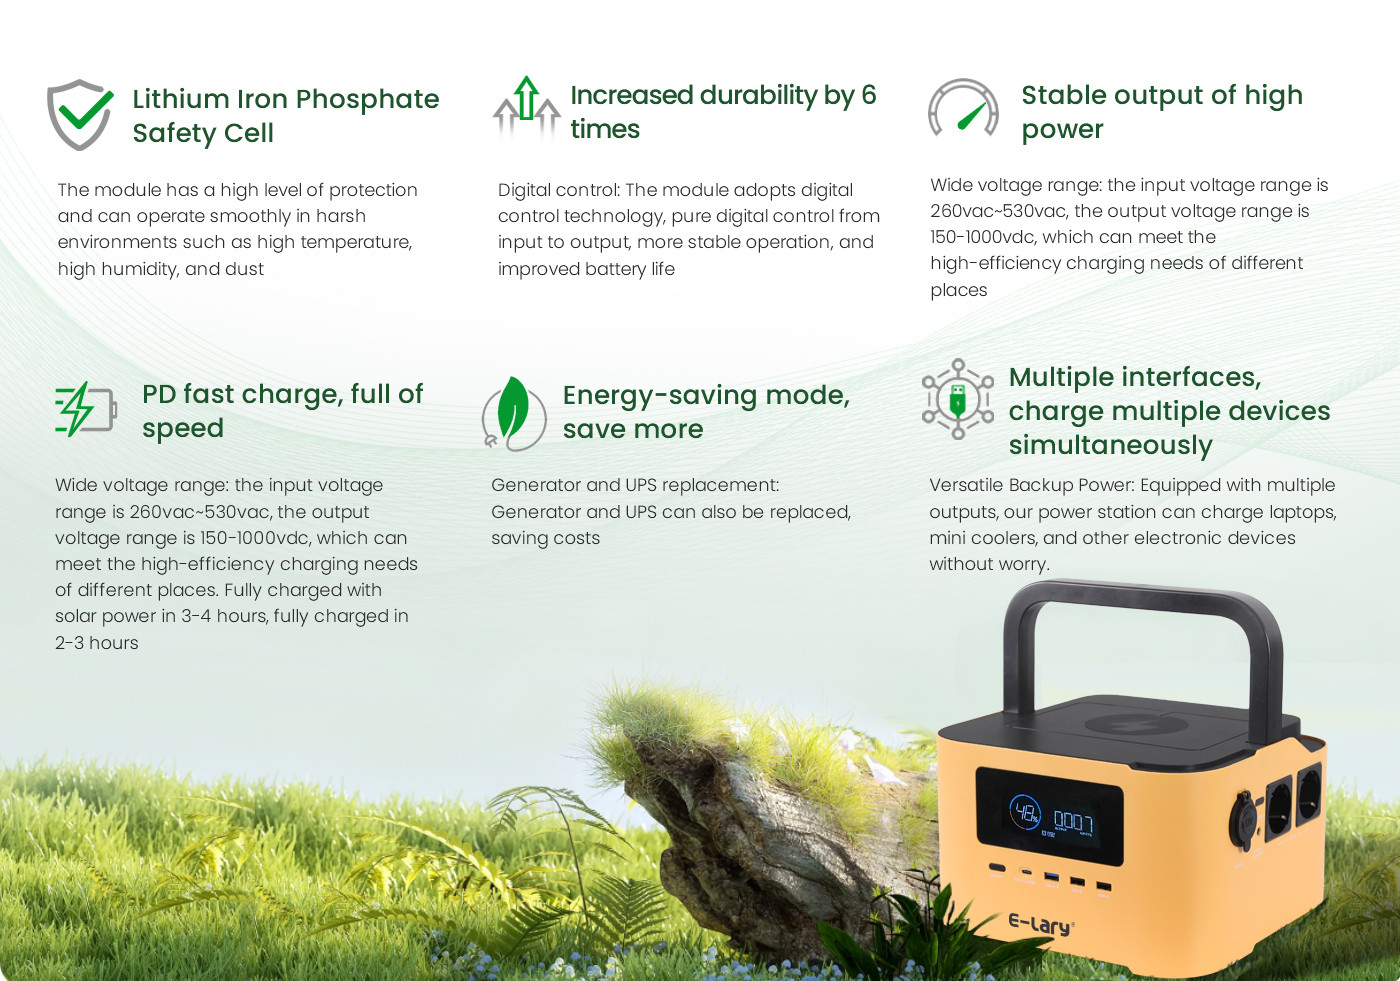 E-lary 650Watt Portable Power Station Featured Products